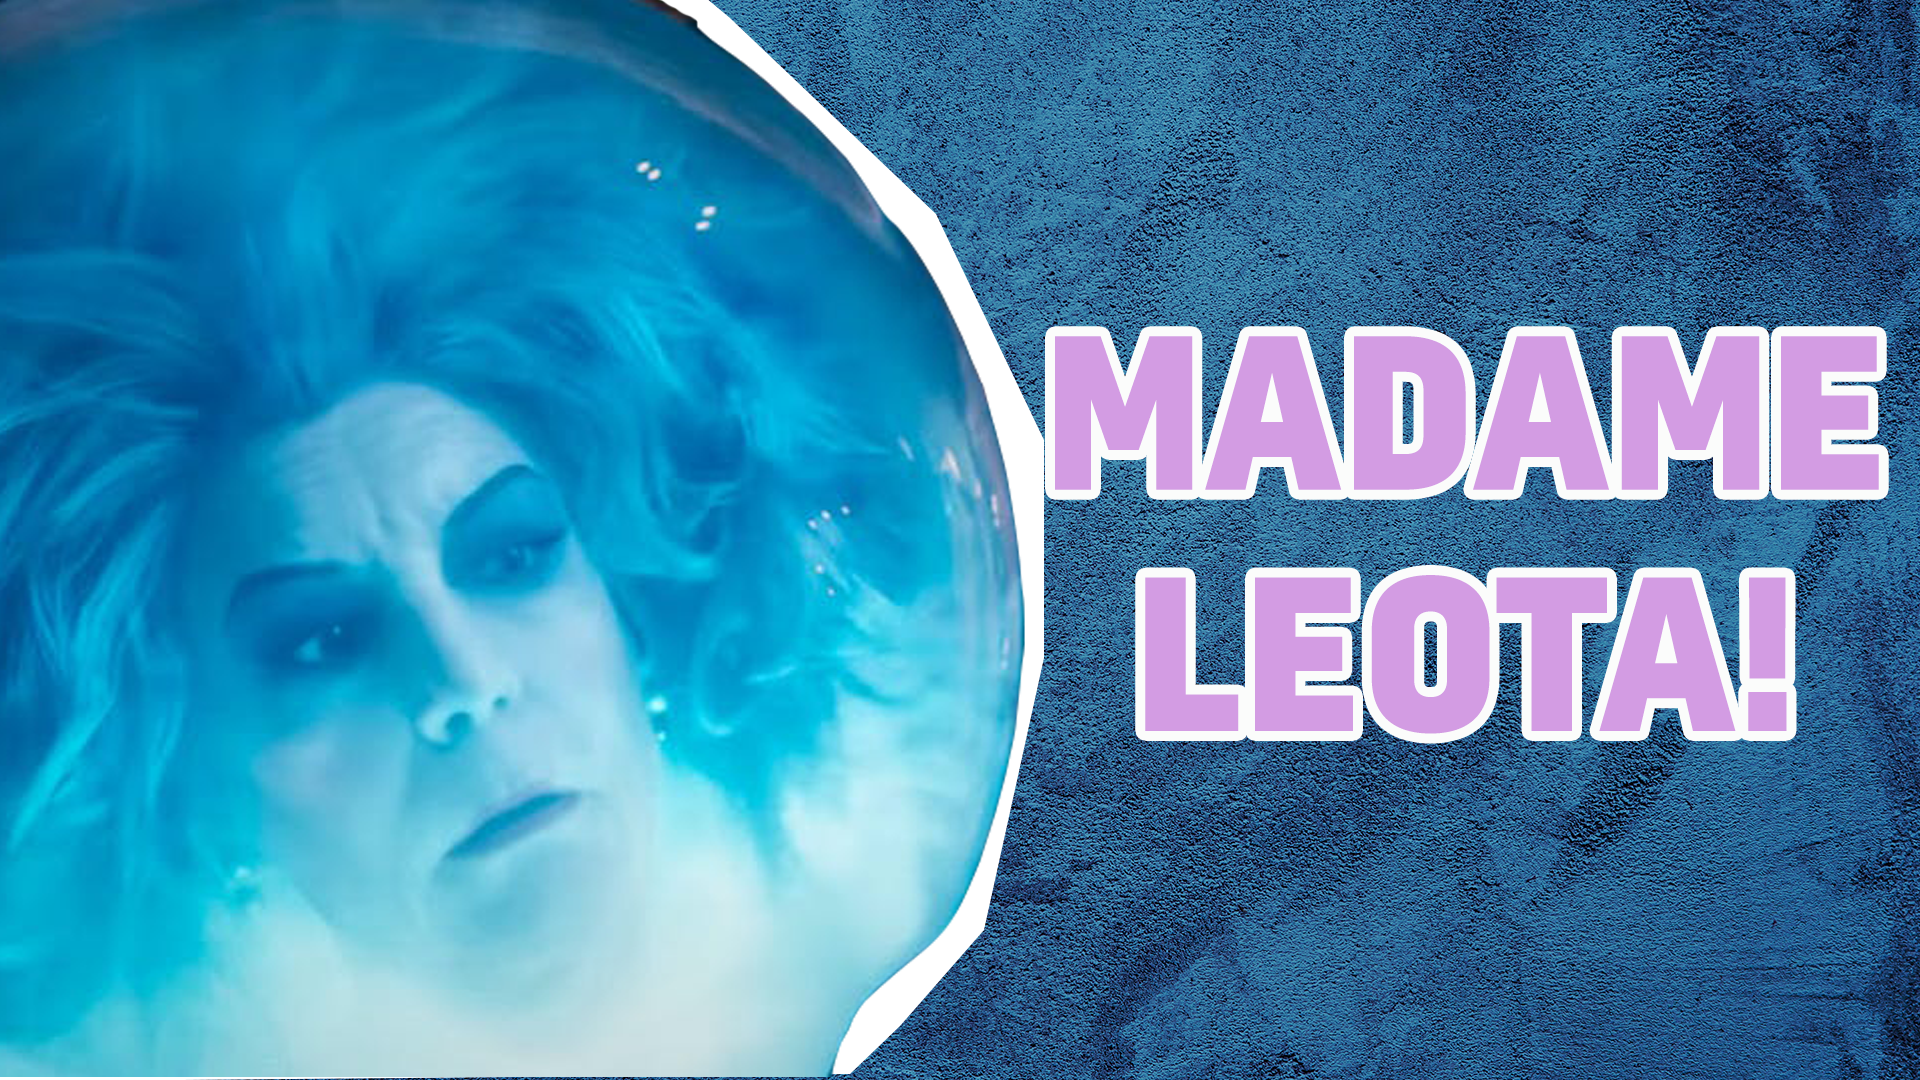 You're Madame Leota! You love predicting the future and you're usually right! Sometimes you can get a bit carried away, but you're always trying your best to help people!